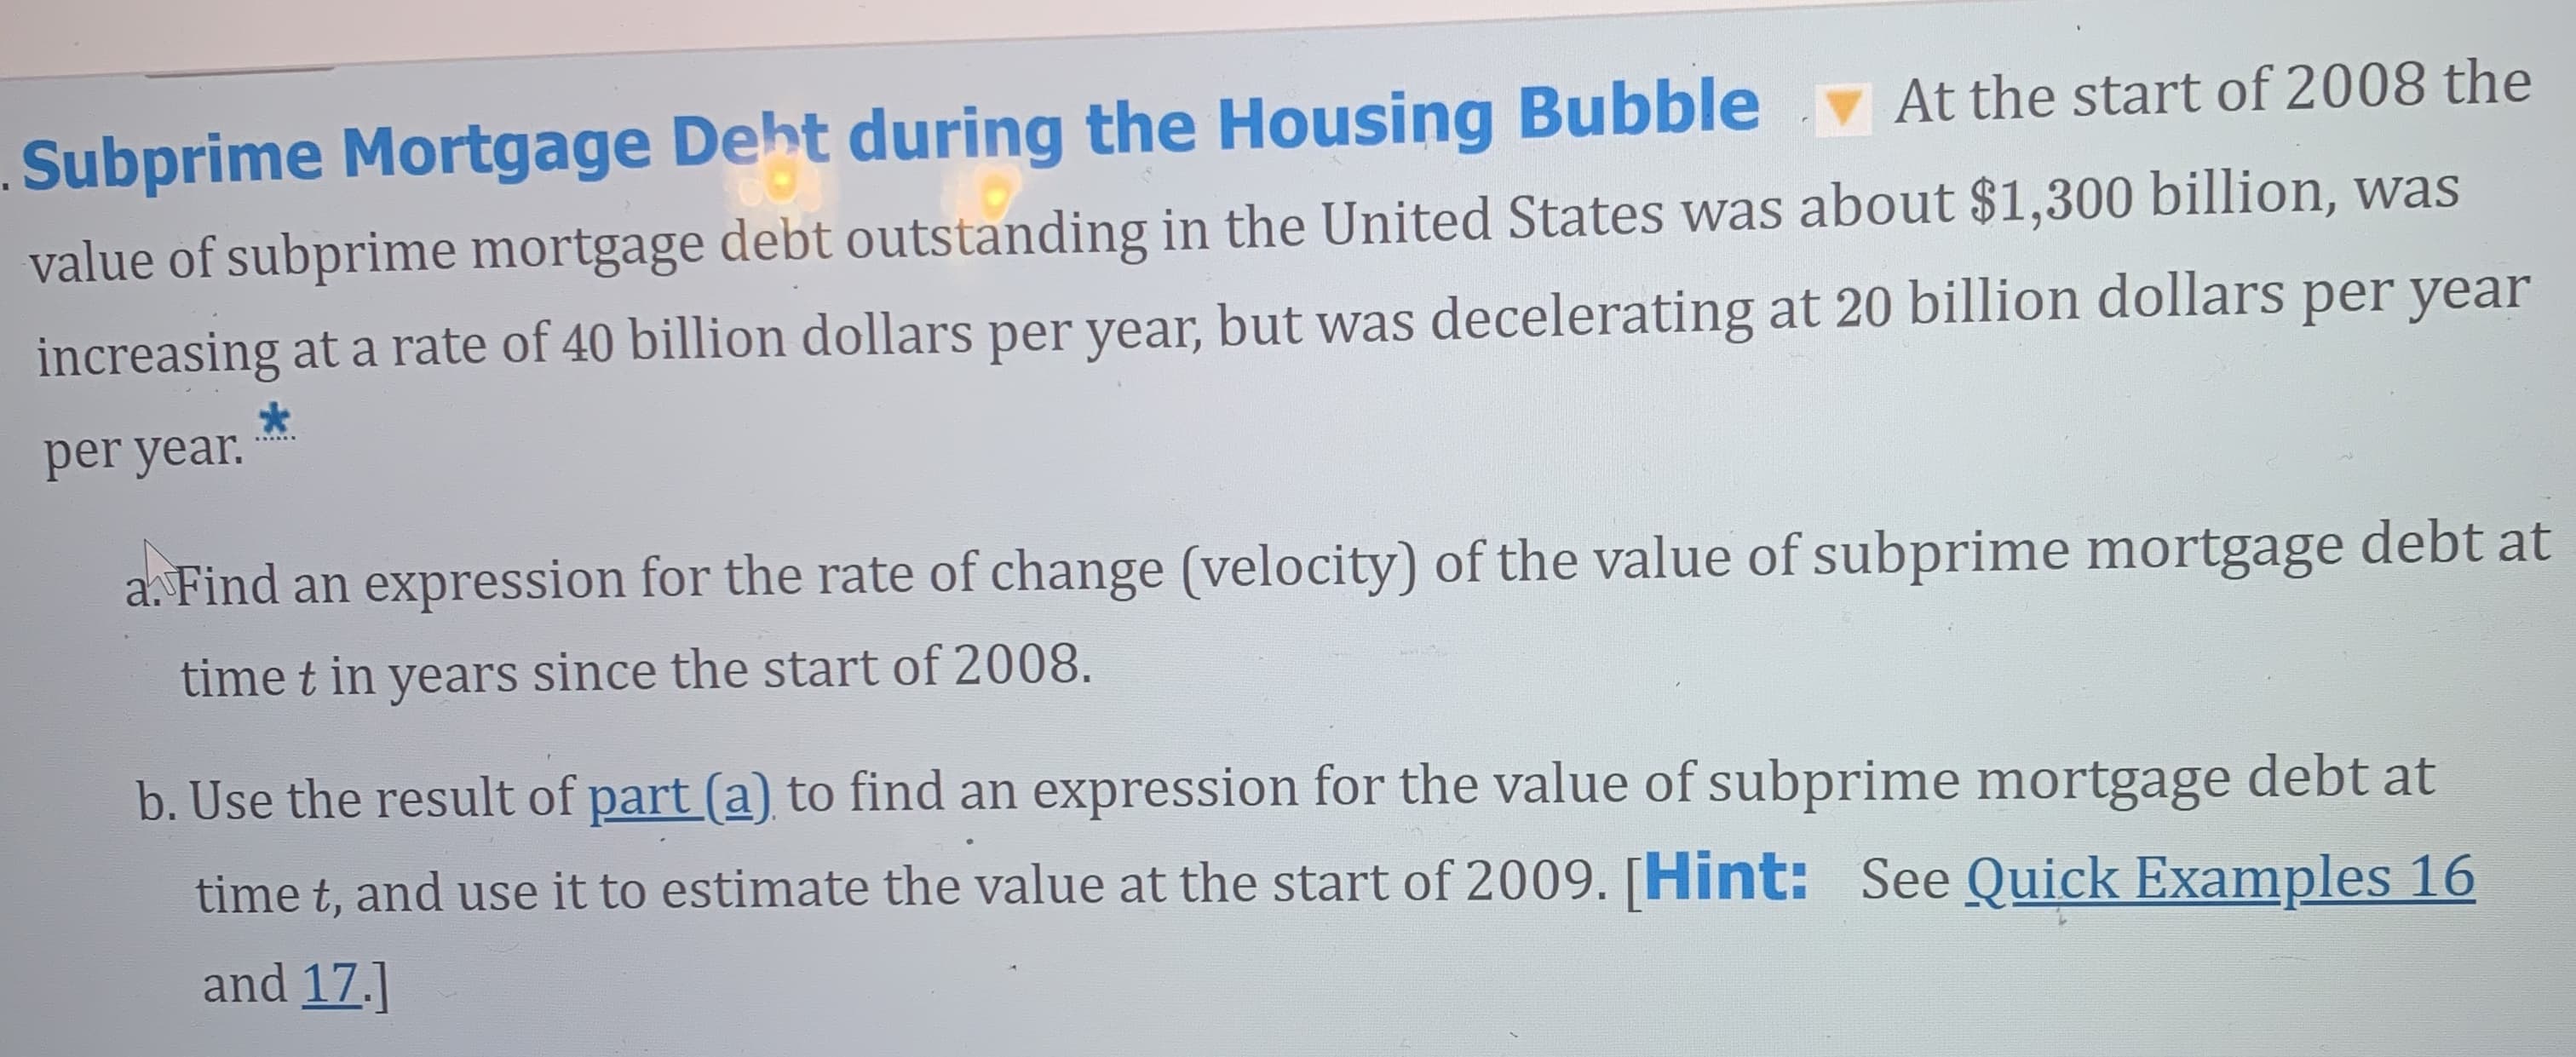 Subprime Mortgage Deht during the Housing Bubble At the start of 2008 the
value of subprime mortgage debt outstanding in the United States was about $1,300 billion, was
increasing at a rate of 40 billion dollars per year, but was decelerating at 20 billion dollars per year
per year.
a. Find an expression for the rate of change (velocity) of the value of subprime mortgage debt at
time t in years since the start of 2008.
b. Use the result of part (a) to find an expression for the value of subprime mortgage debt at
time t, and use it to estimate the value at the start of 2009. [Hint: See Quick Examples 16
and 17.]
